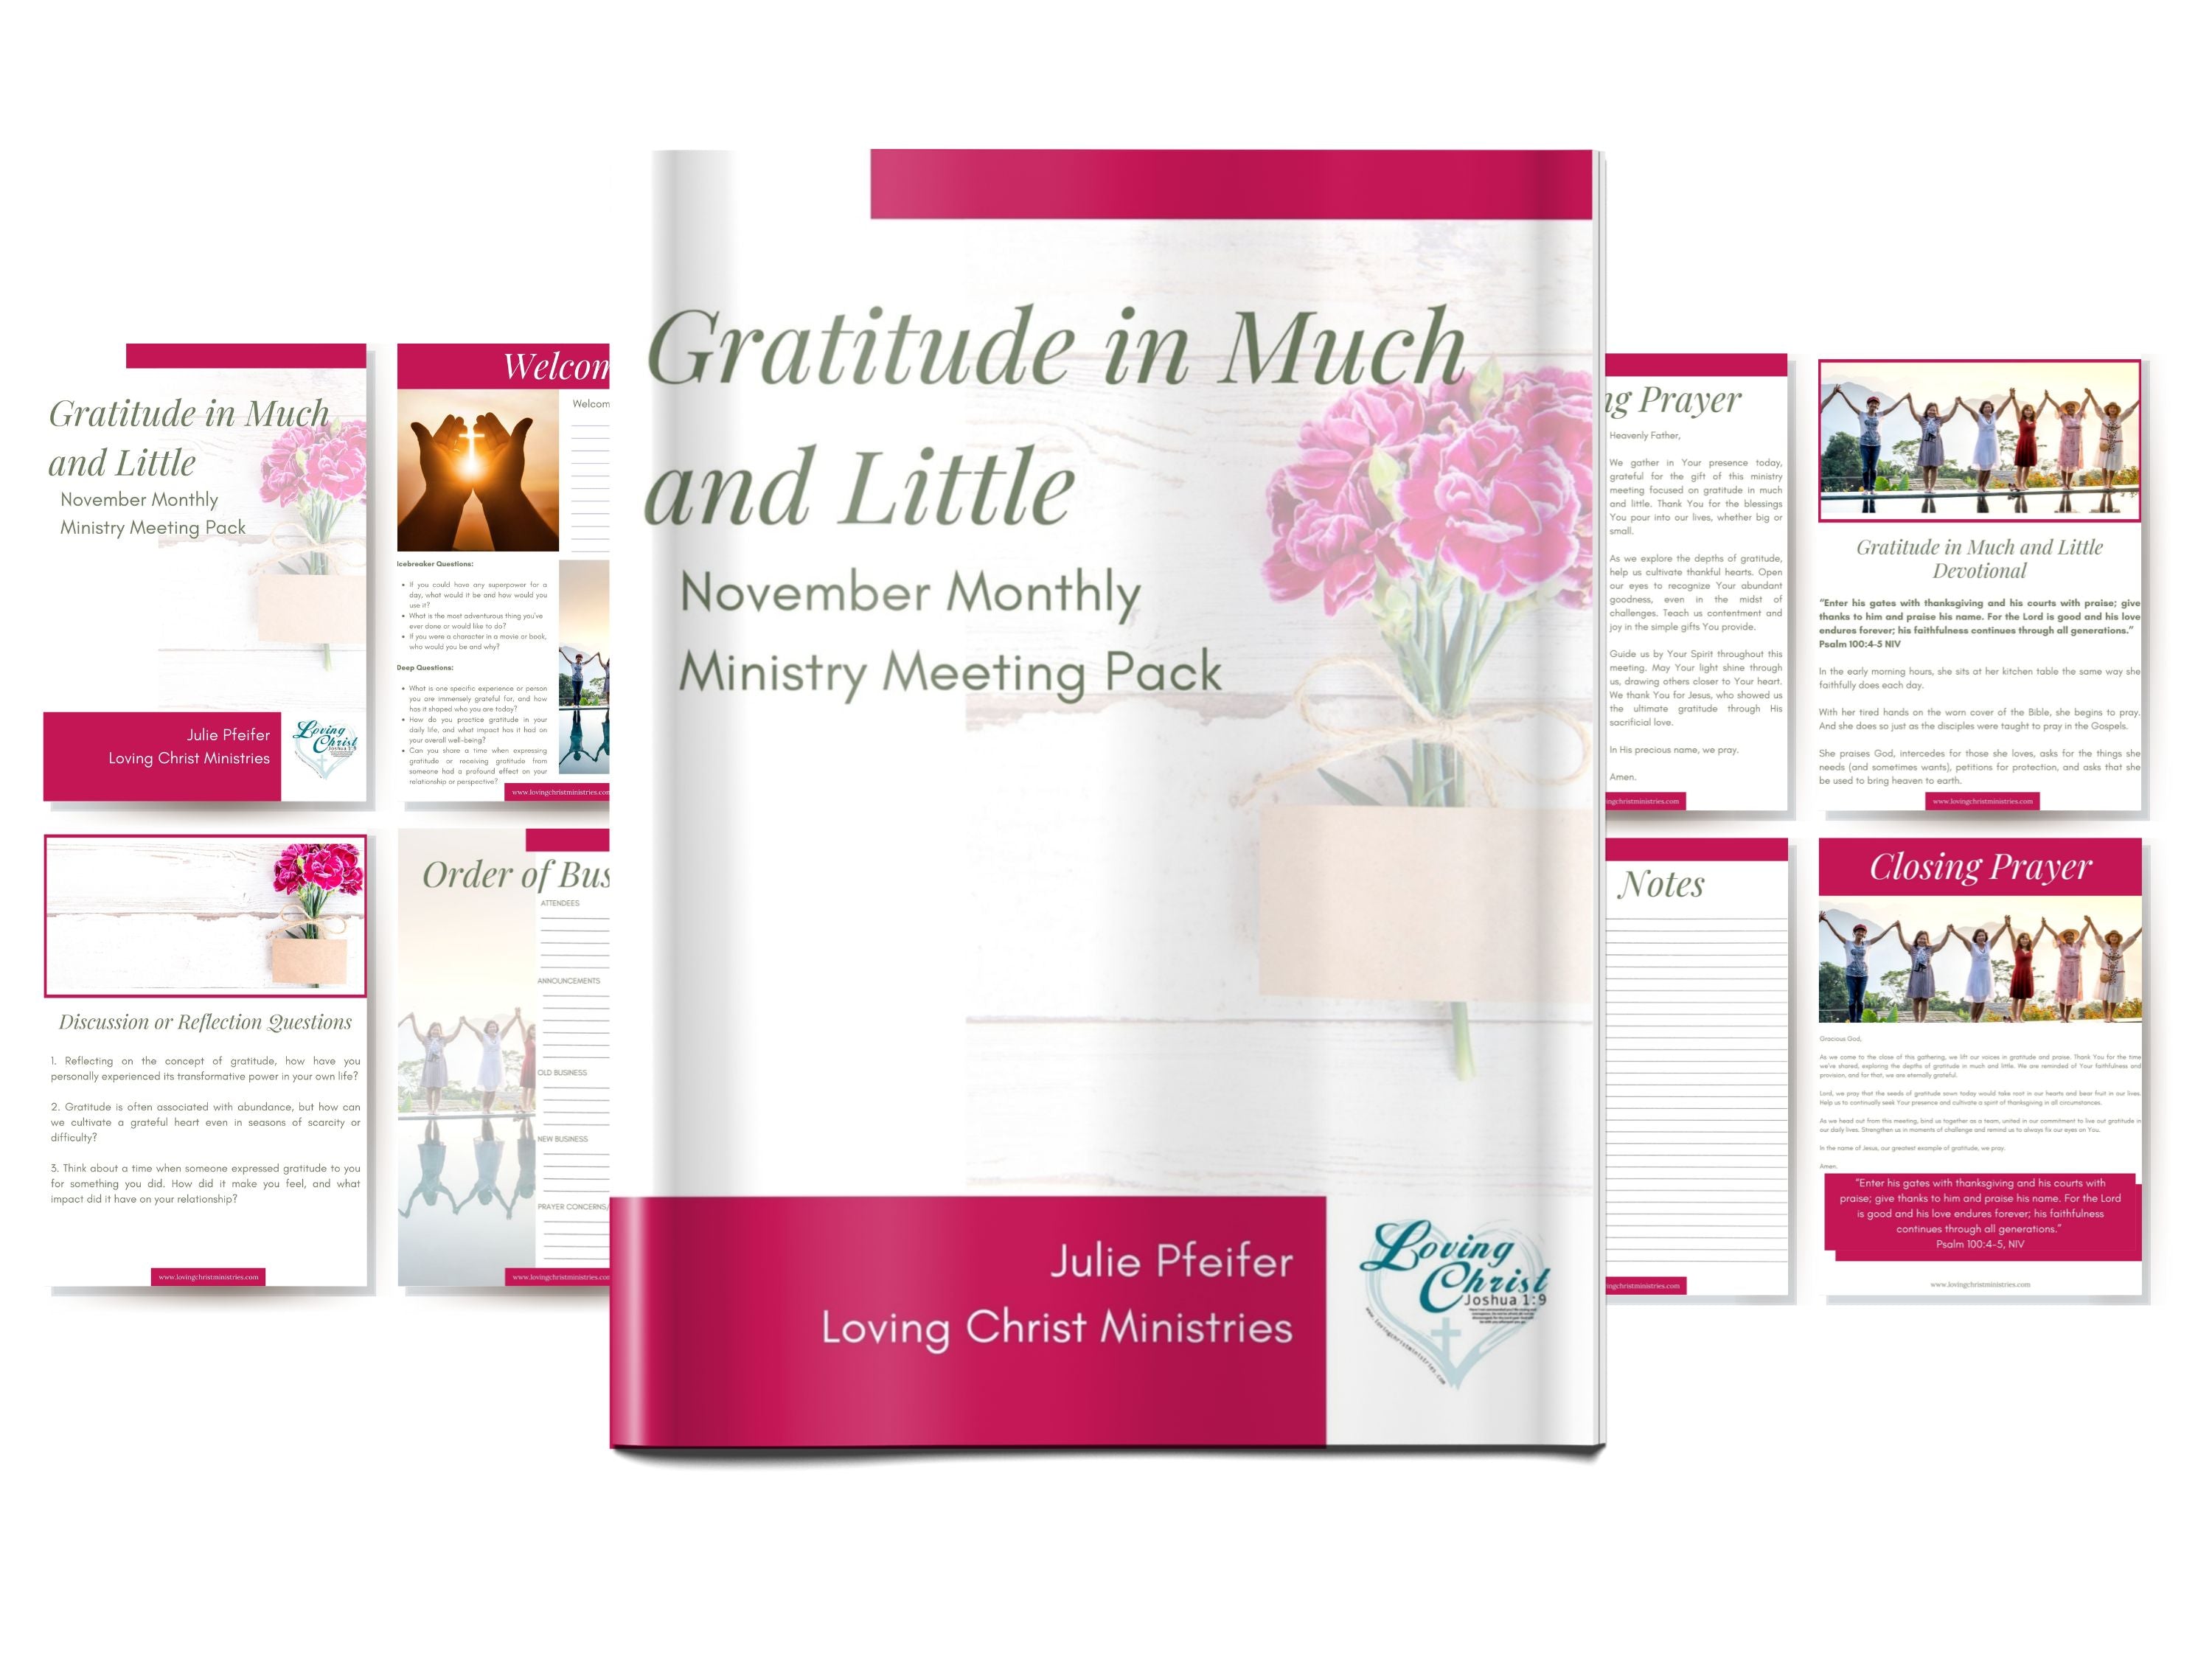 Gratitude in Much and Little - November Monthly Ministry Meeting Pack